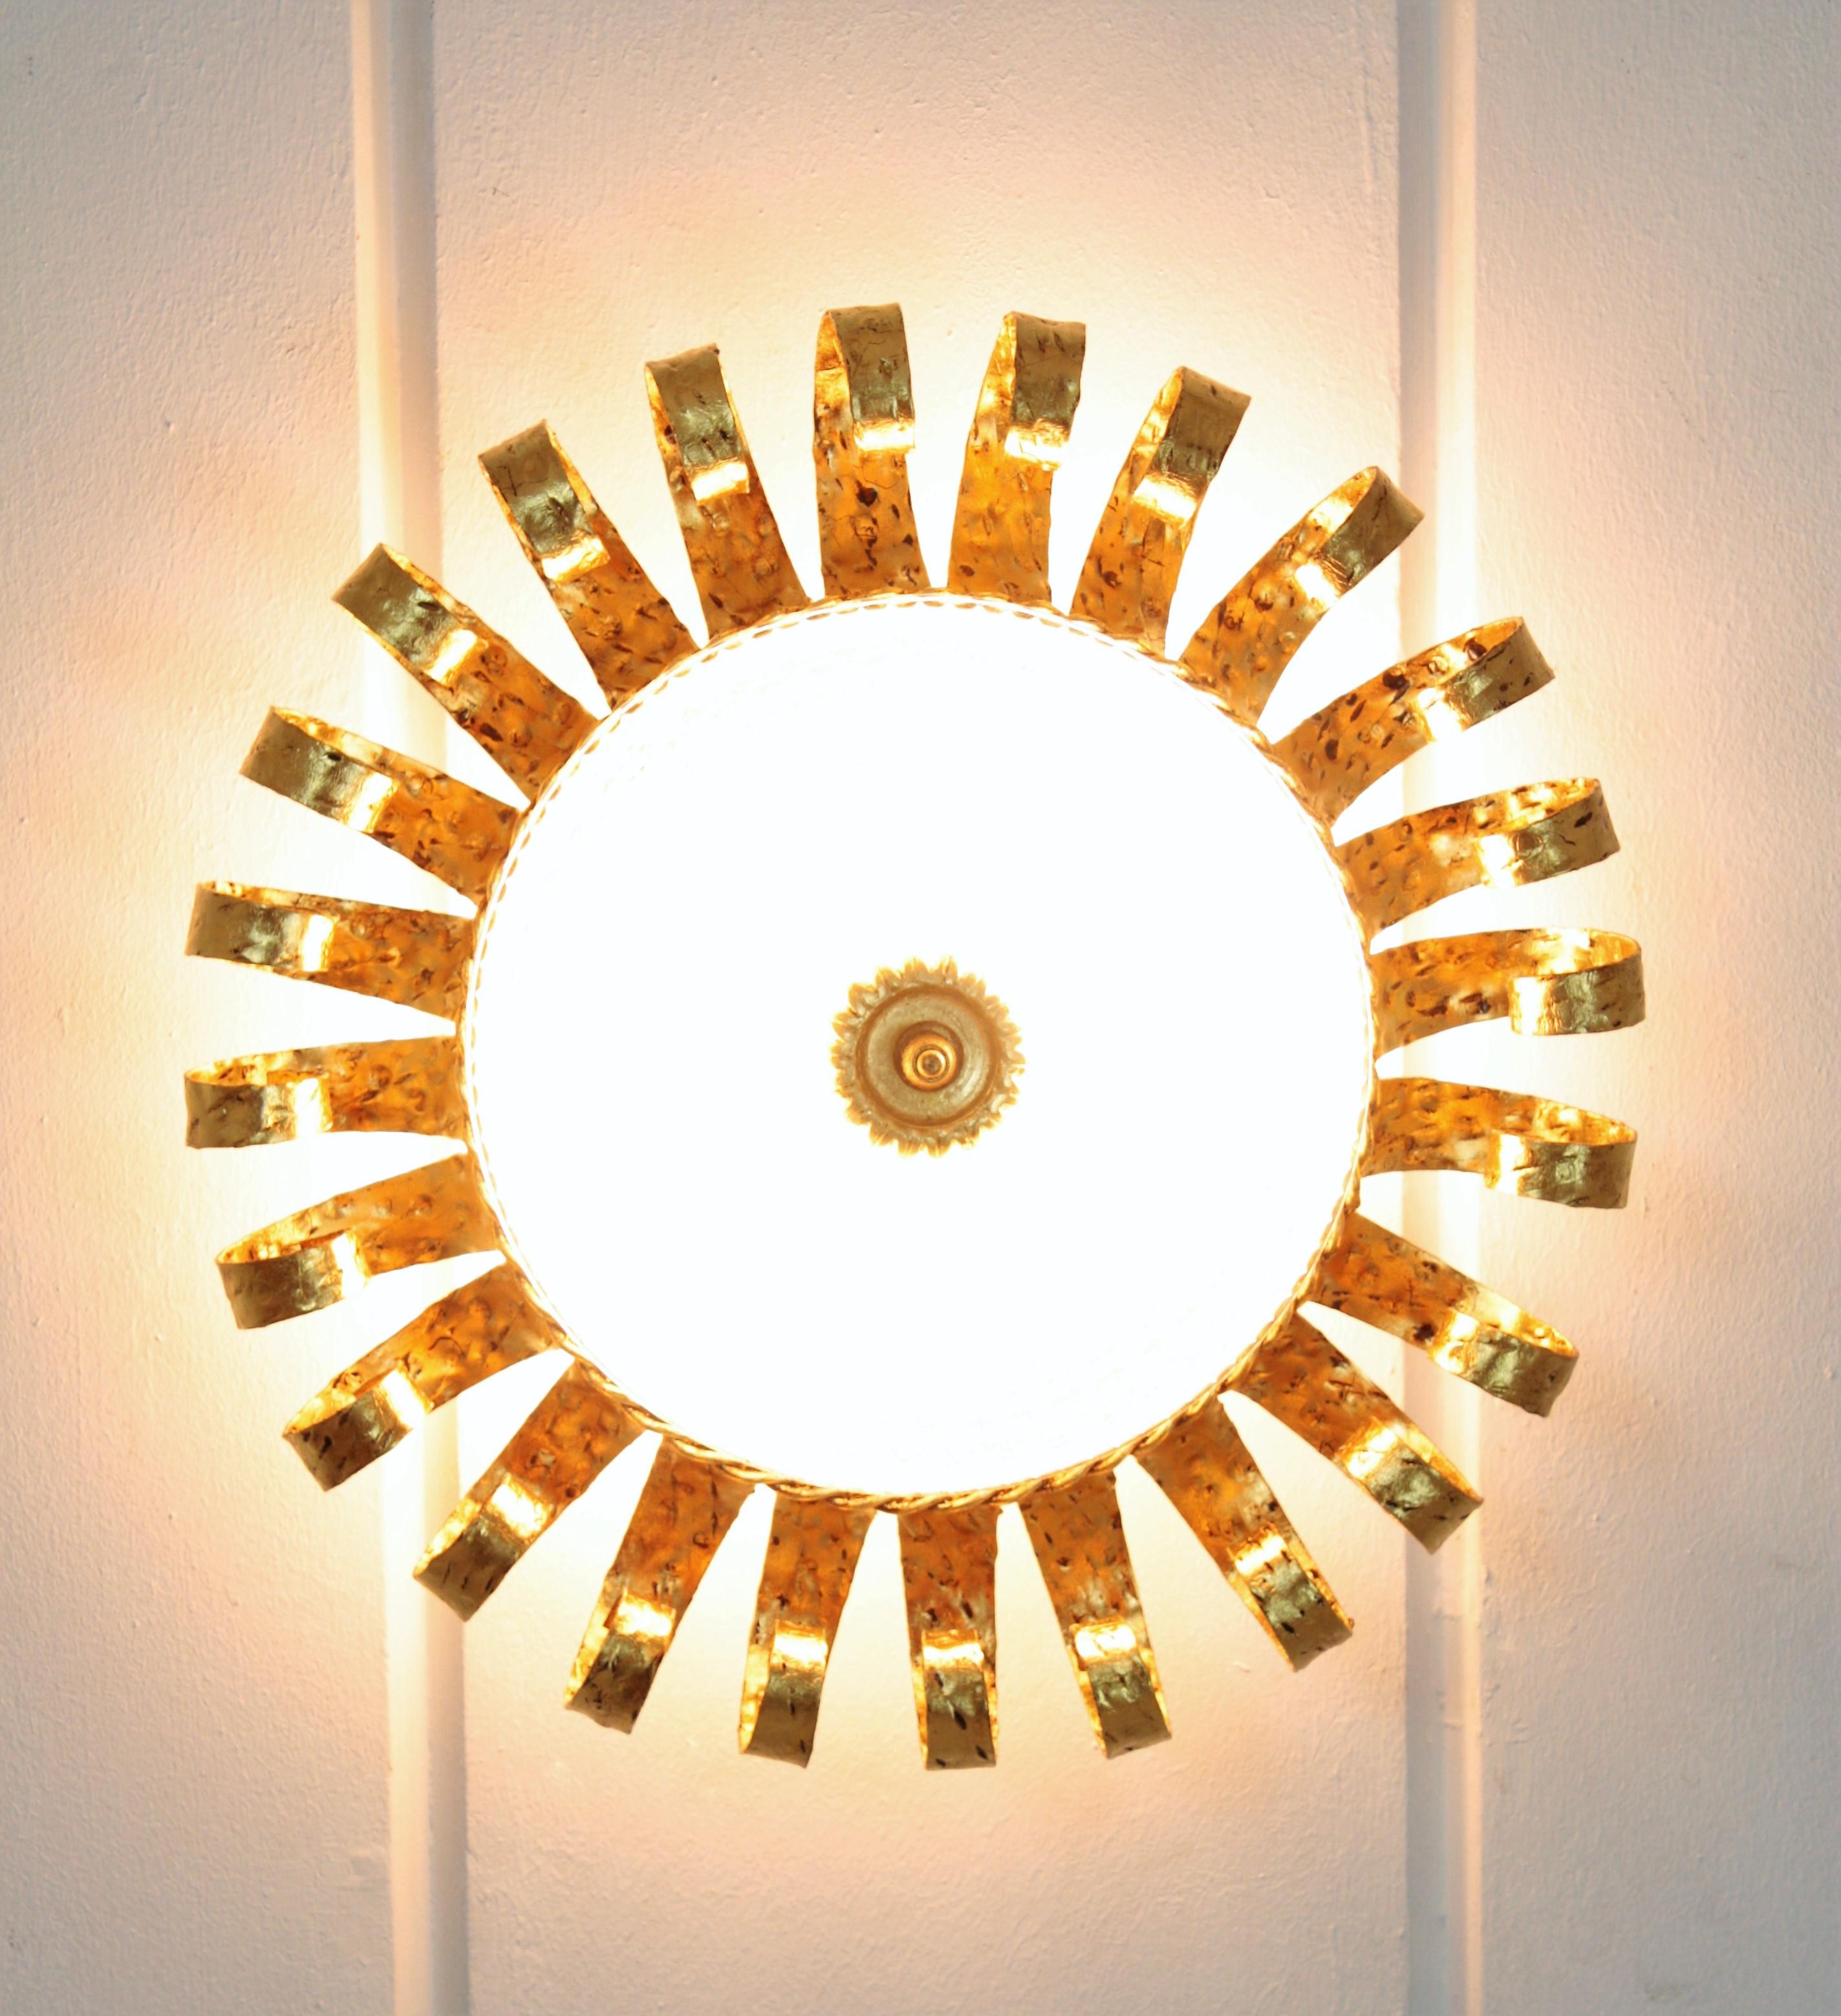 Pressed Sunburst Crown Ceiling Light Fixtures, Gilt Iron and Glass, Set of Five 